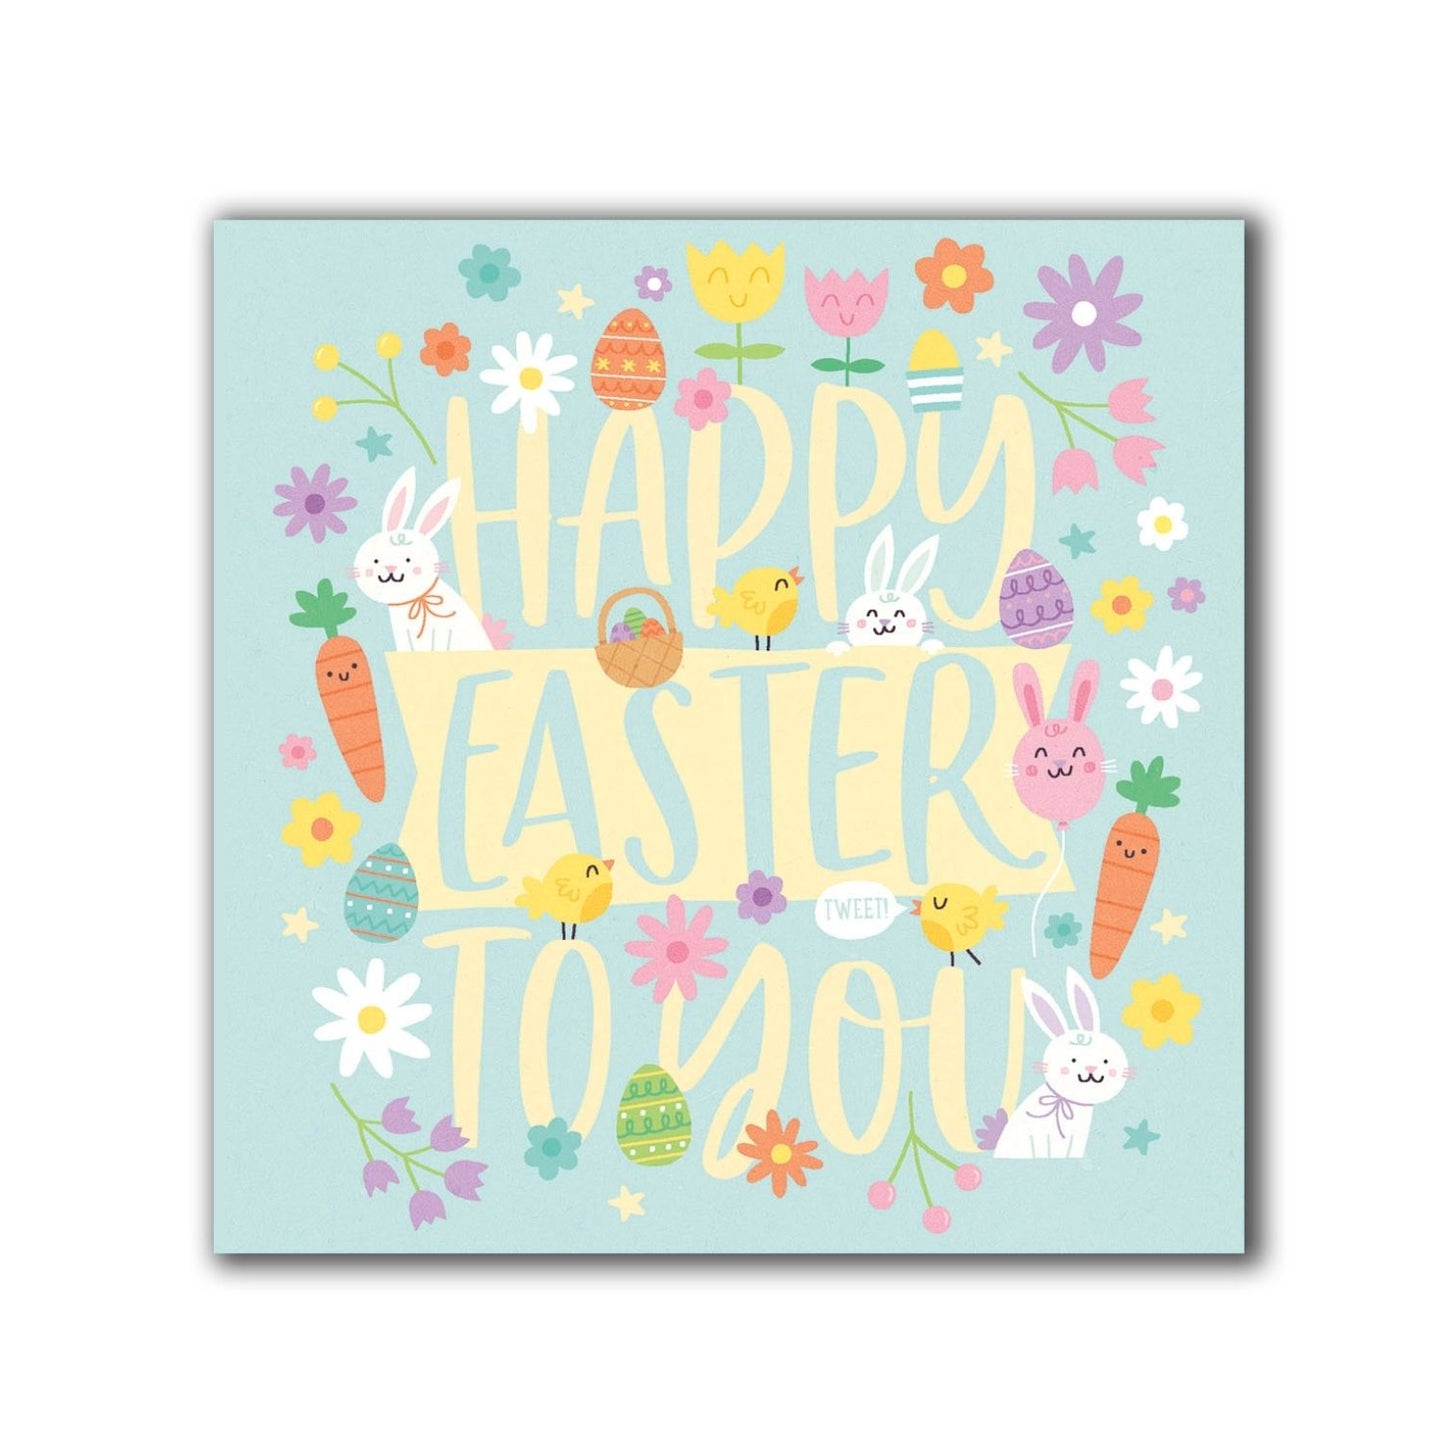 Pack Of 6 British Heart Foundation Happy Easter Cards Charity Greeting Cards